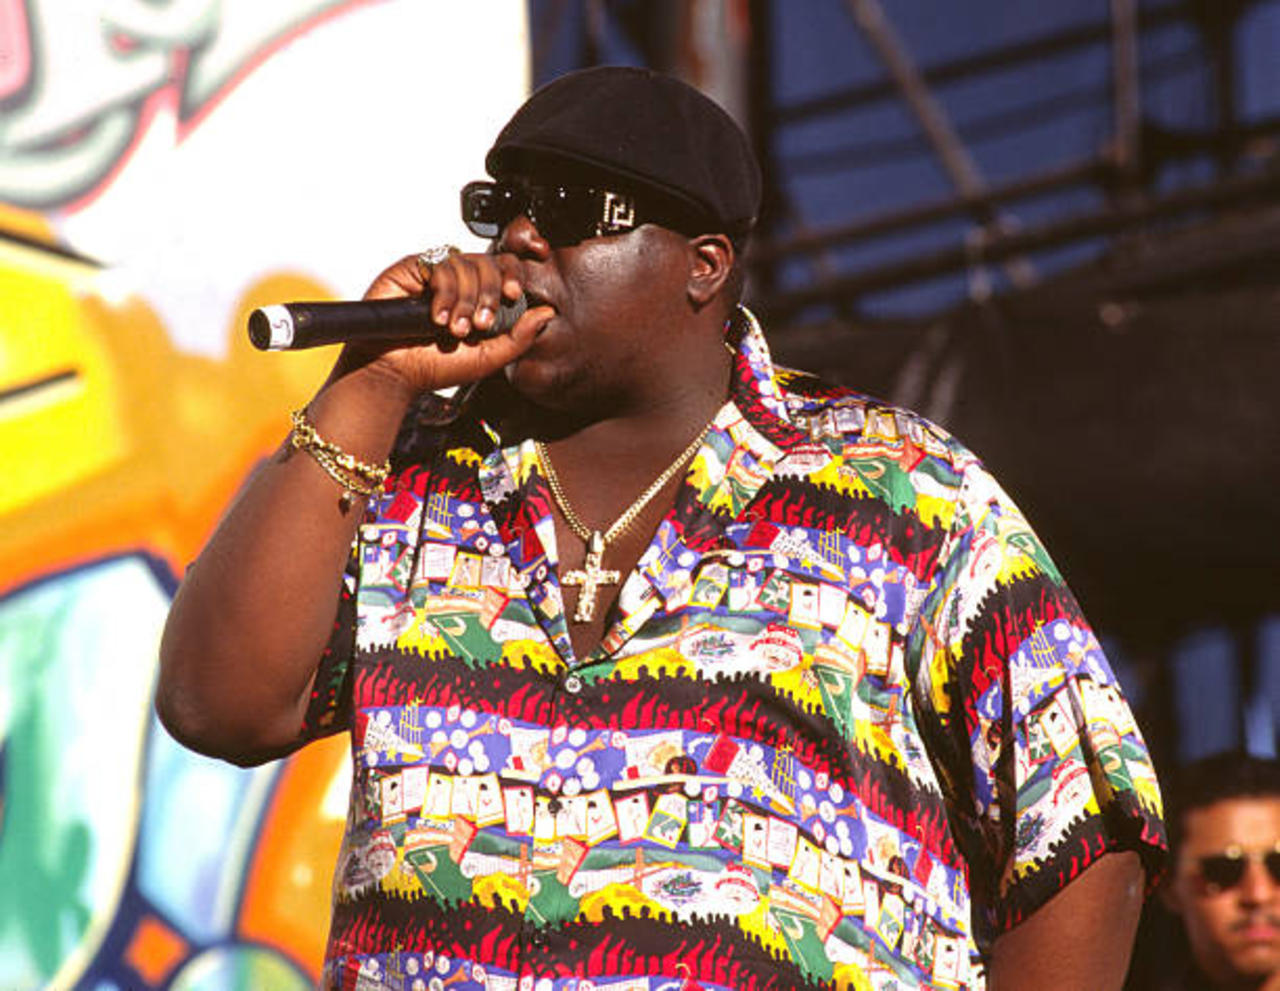 Remembering The Notorious B.I.G (Sunday, May 21st)